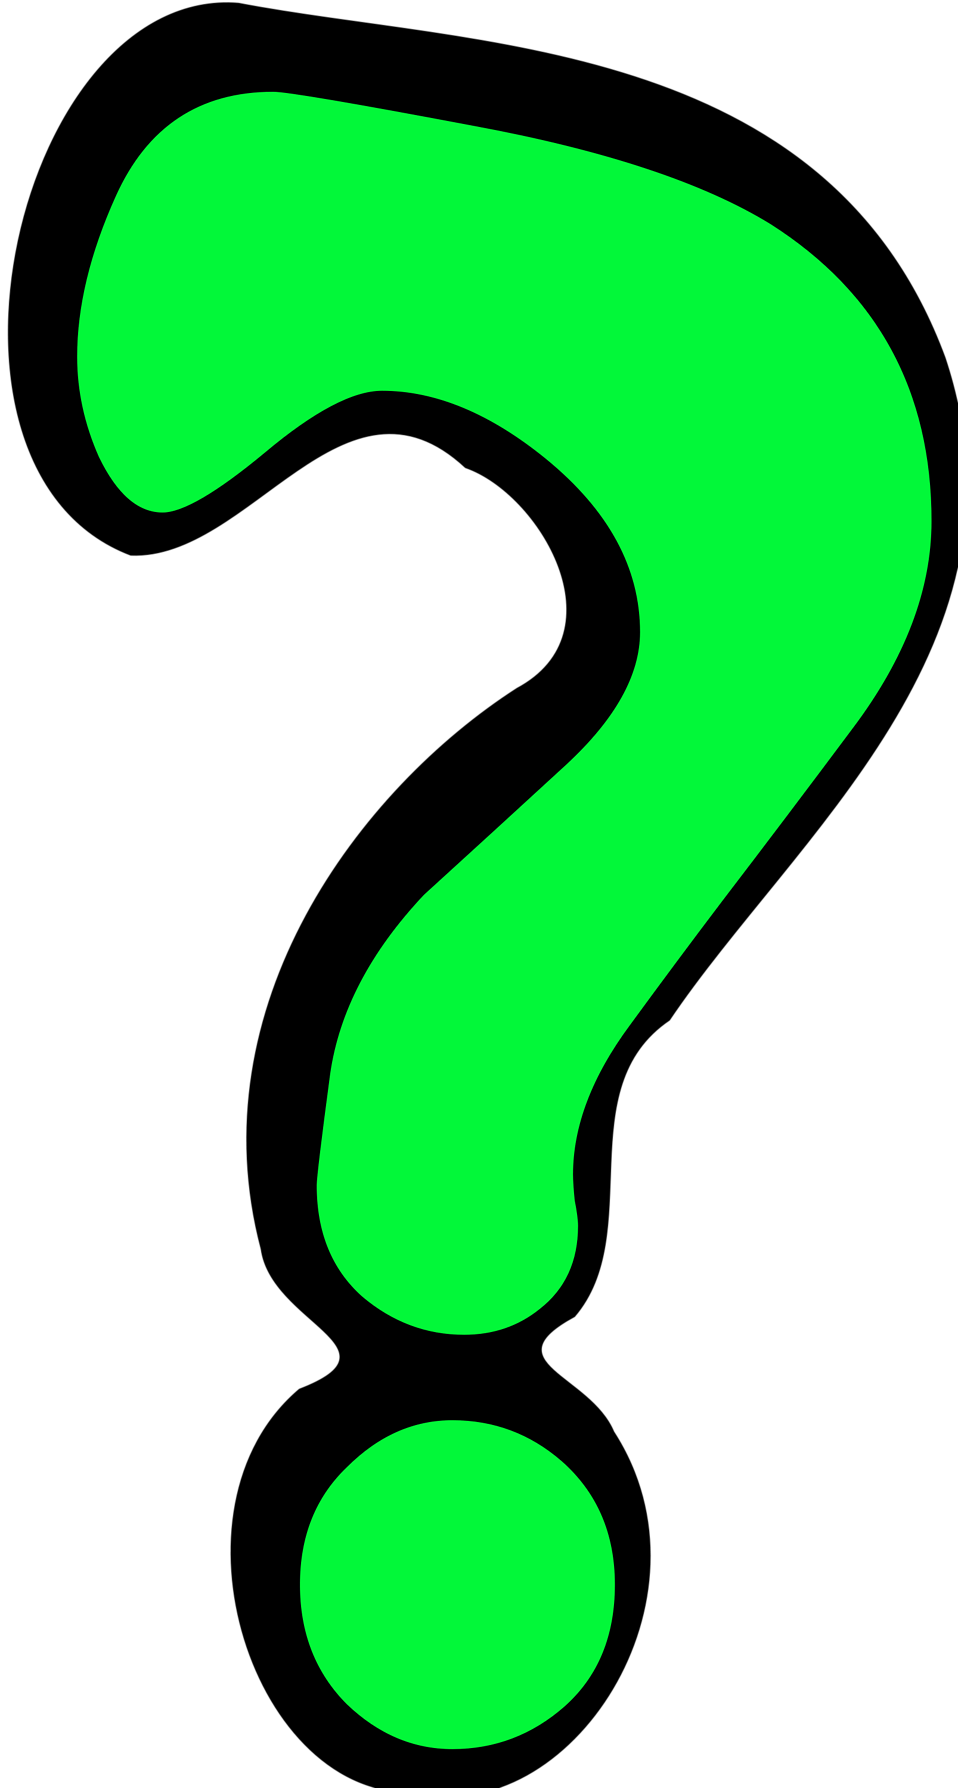 Question Mark | Free Stock Photo | Illustration of a green question mark | # 16032